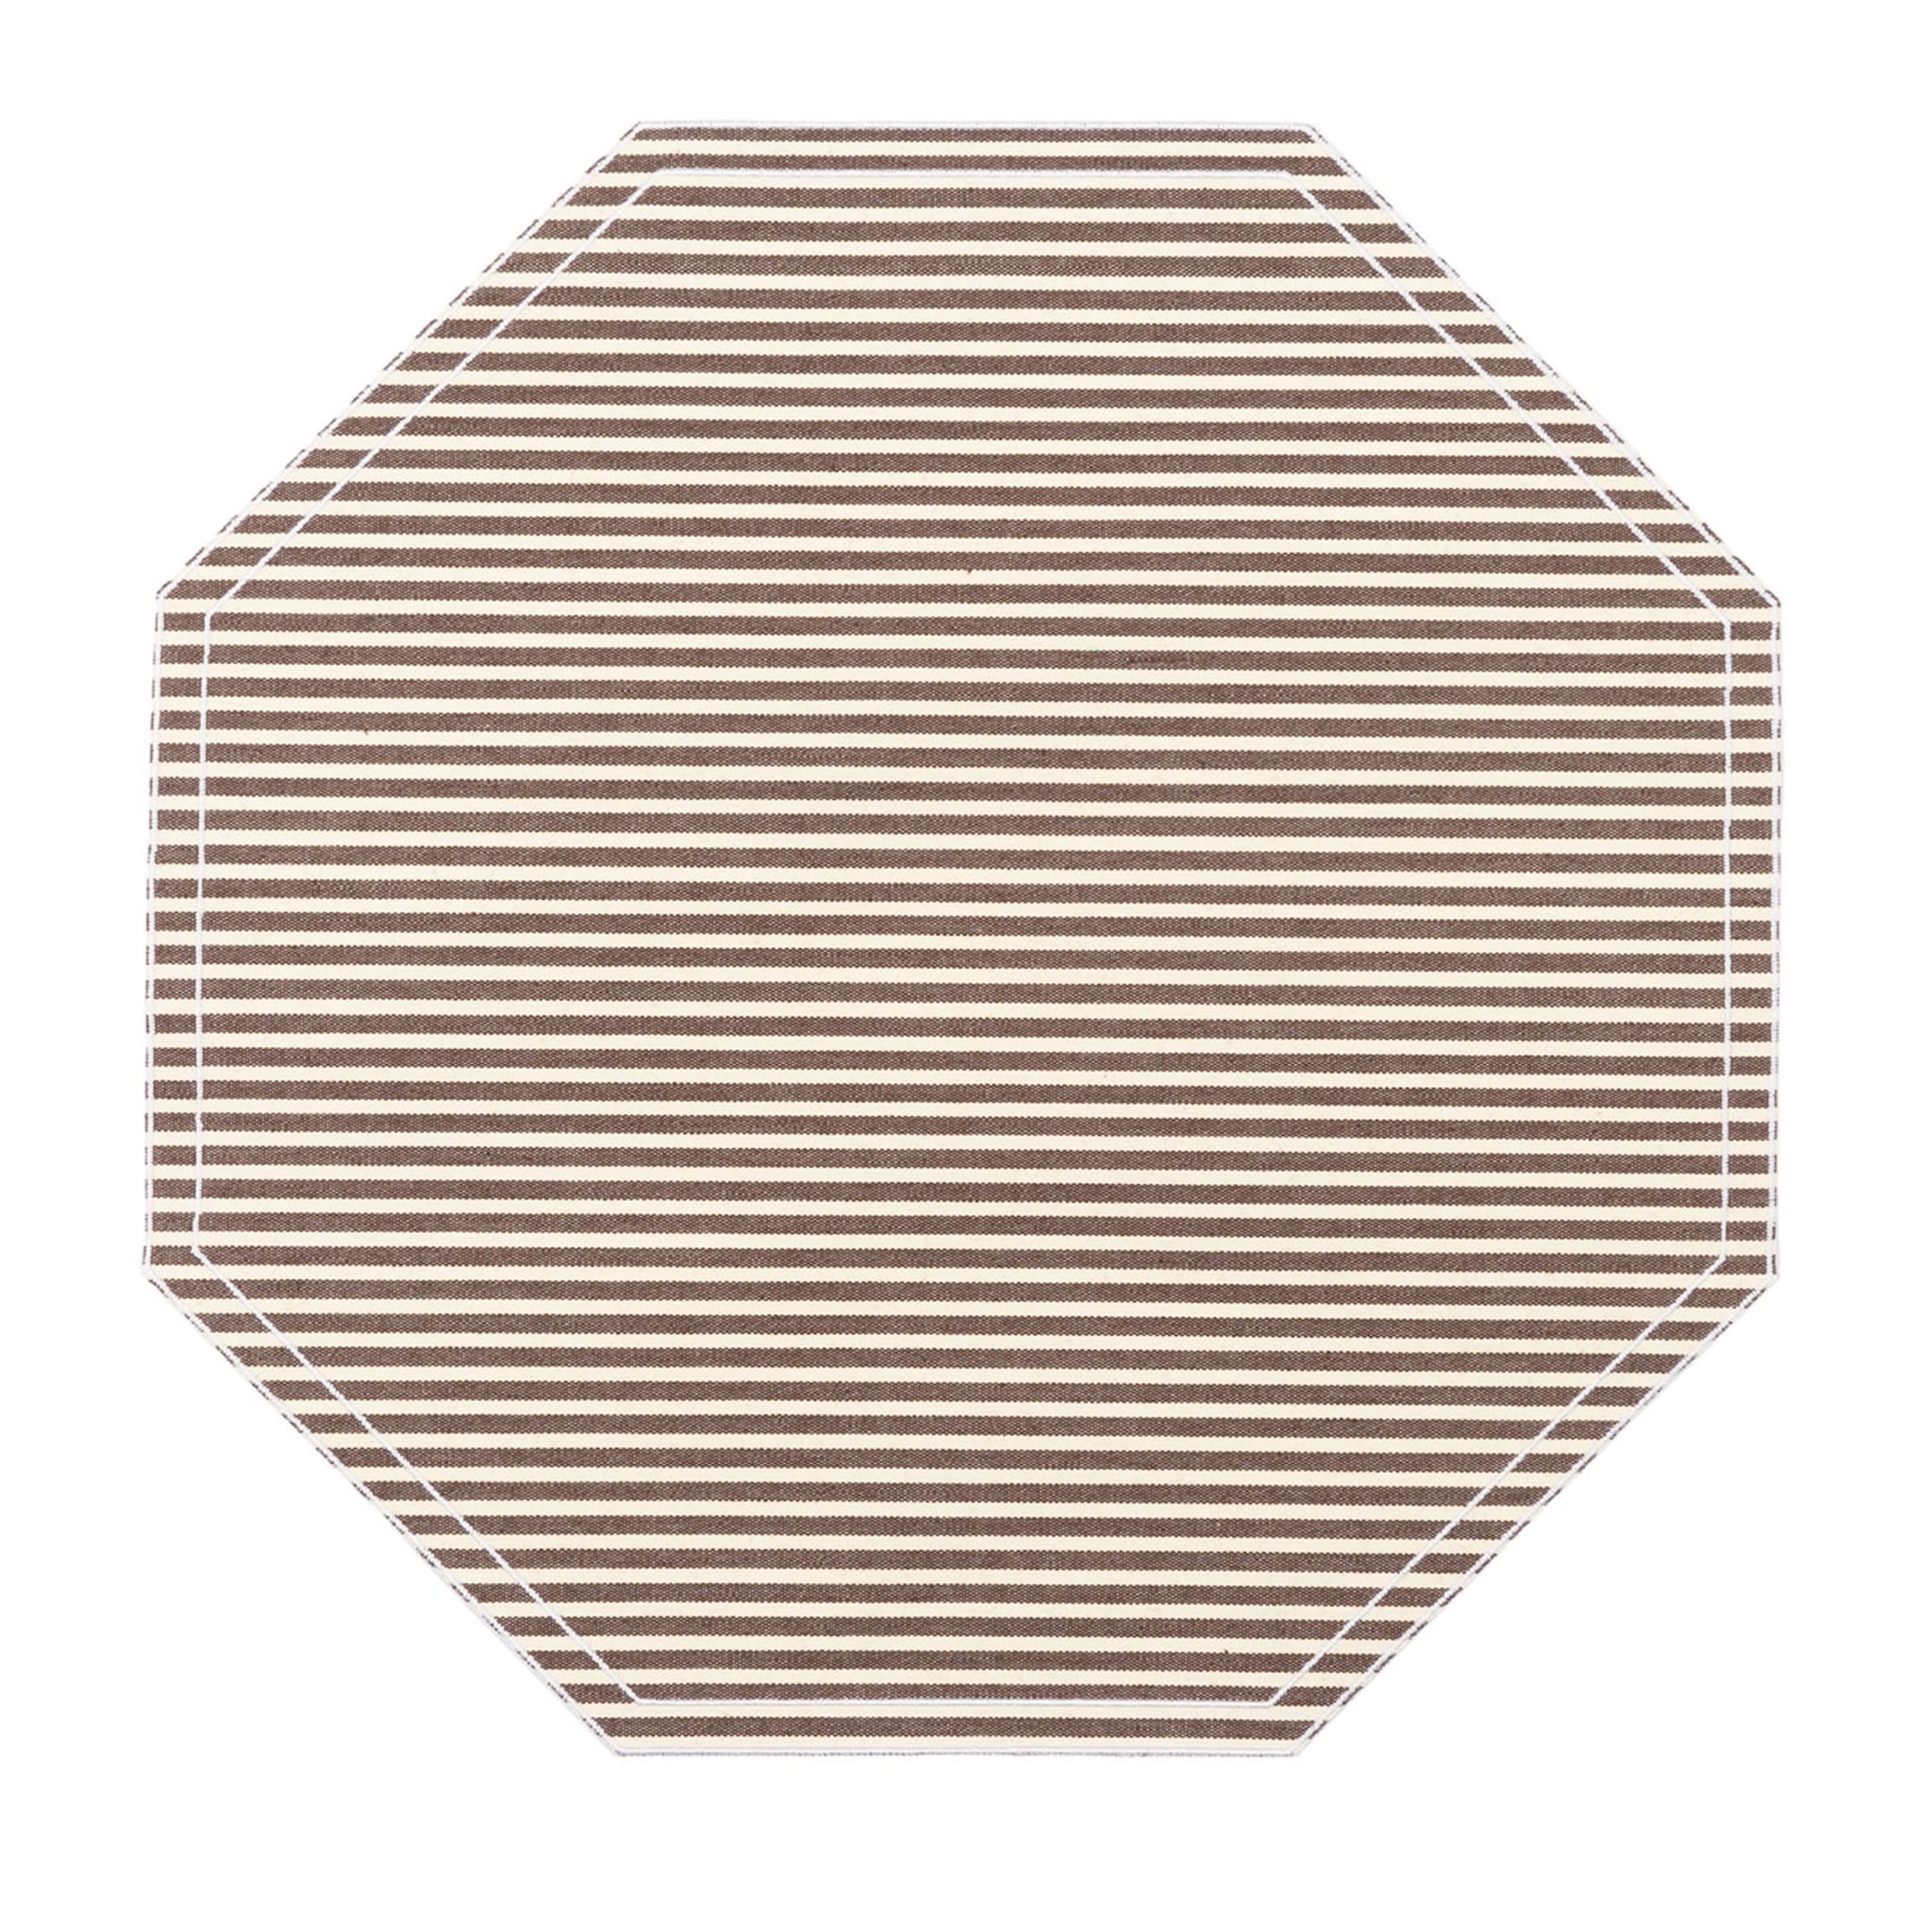 Set of 2 Mr Stripes Octagon Brown & White Placemats - Main view